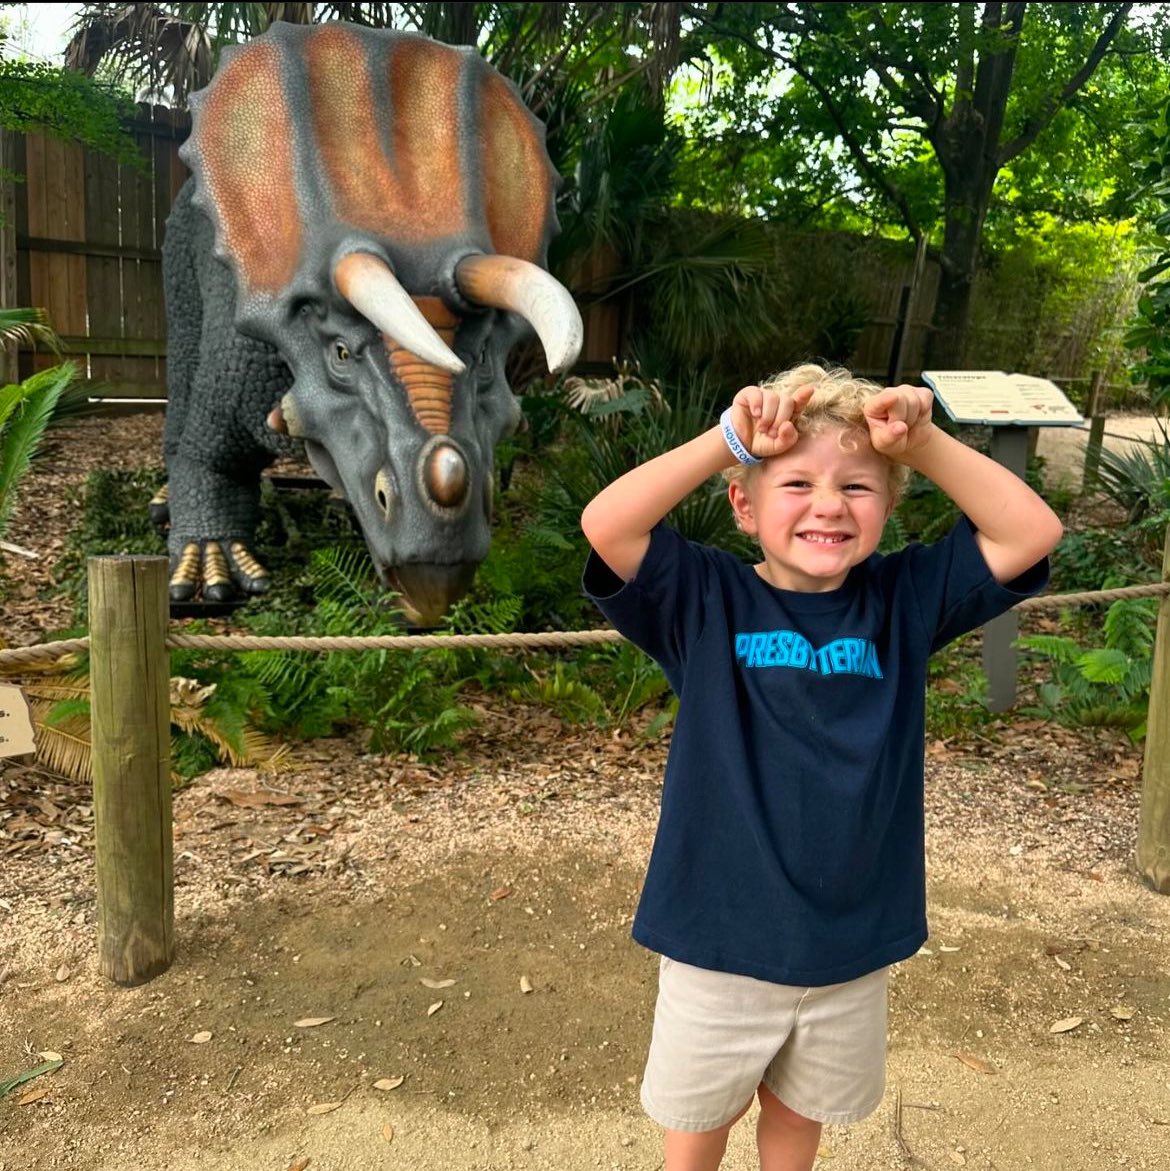 What’s your favorite dinosaur and why is it the Triceratops? 🤔 See what the roar is all about at TXU Energy presents Dinosaurs! See the animatronic versions of Triceratops, T-rex and more during your Zoo visit. Buy Value Pass at houstonzoo.org. 📸: @ the_b__boys